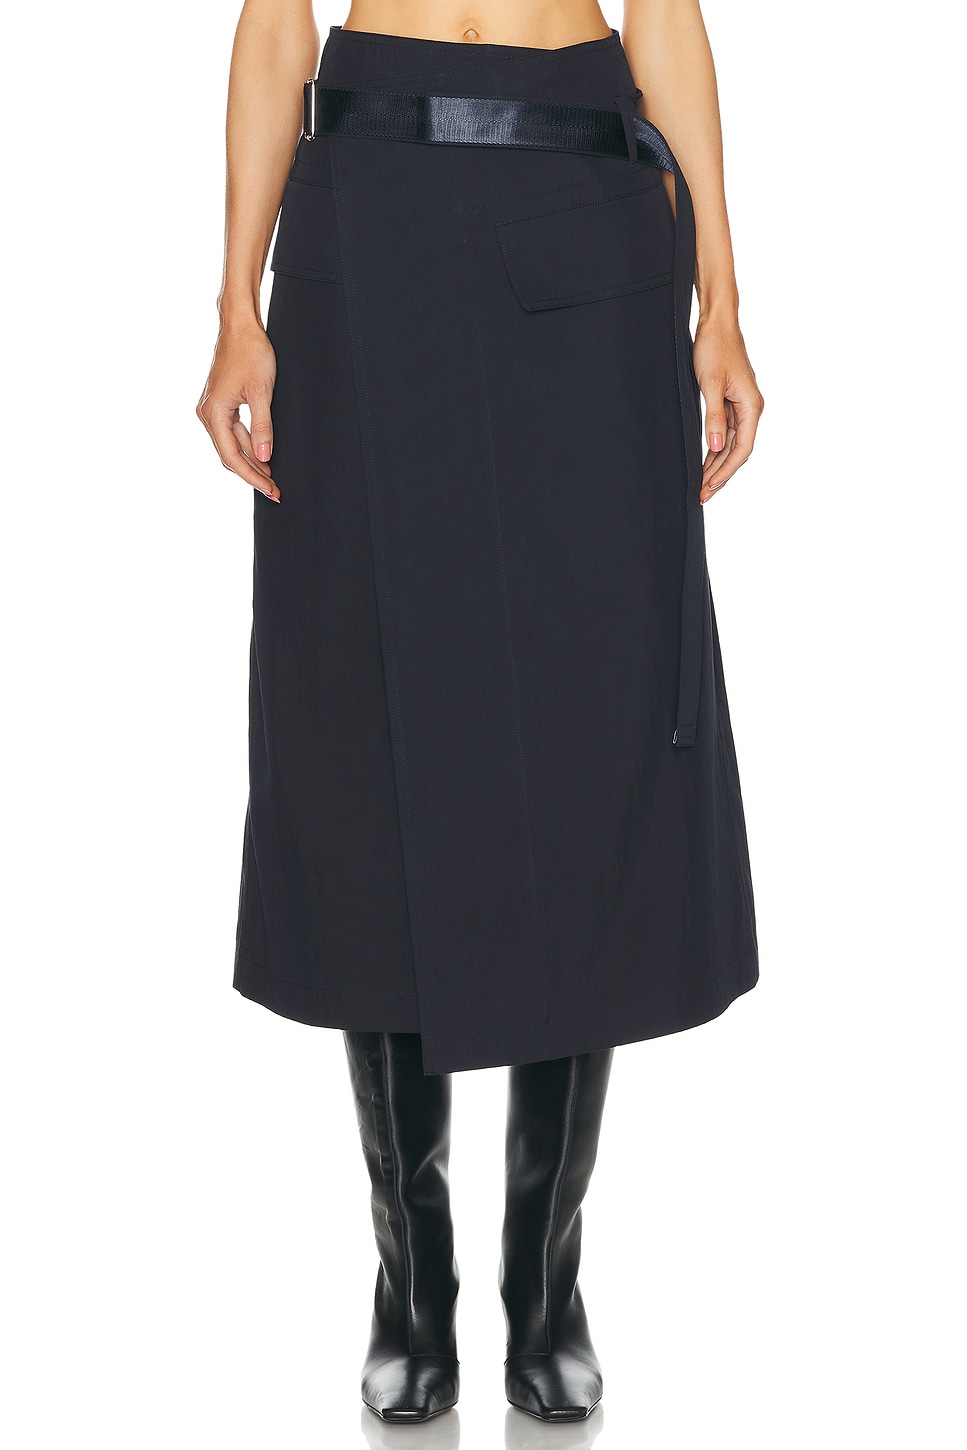 Image 1 of Helmut Lang Trench Skirt in Navy